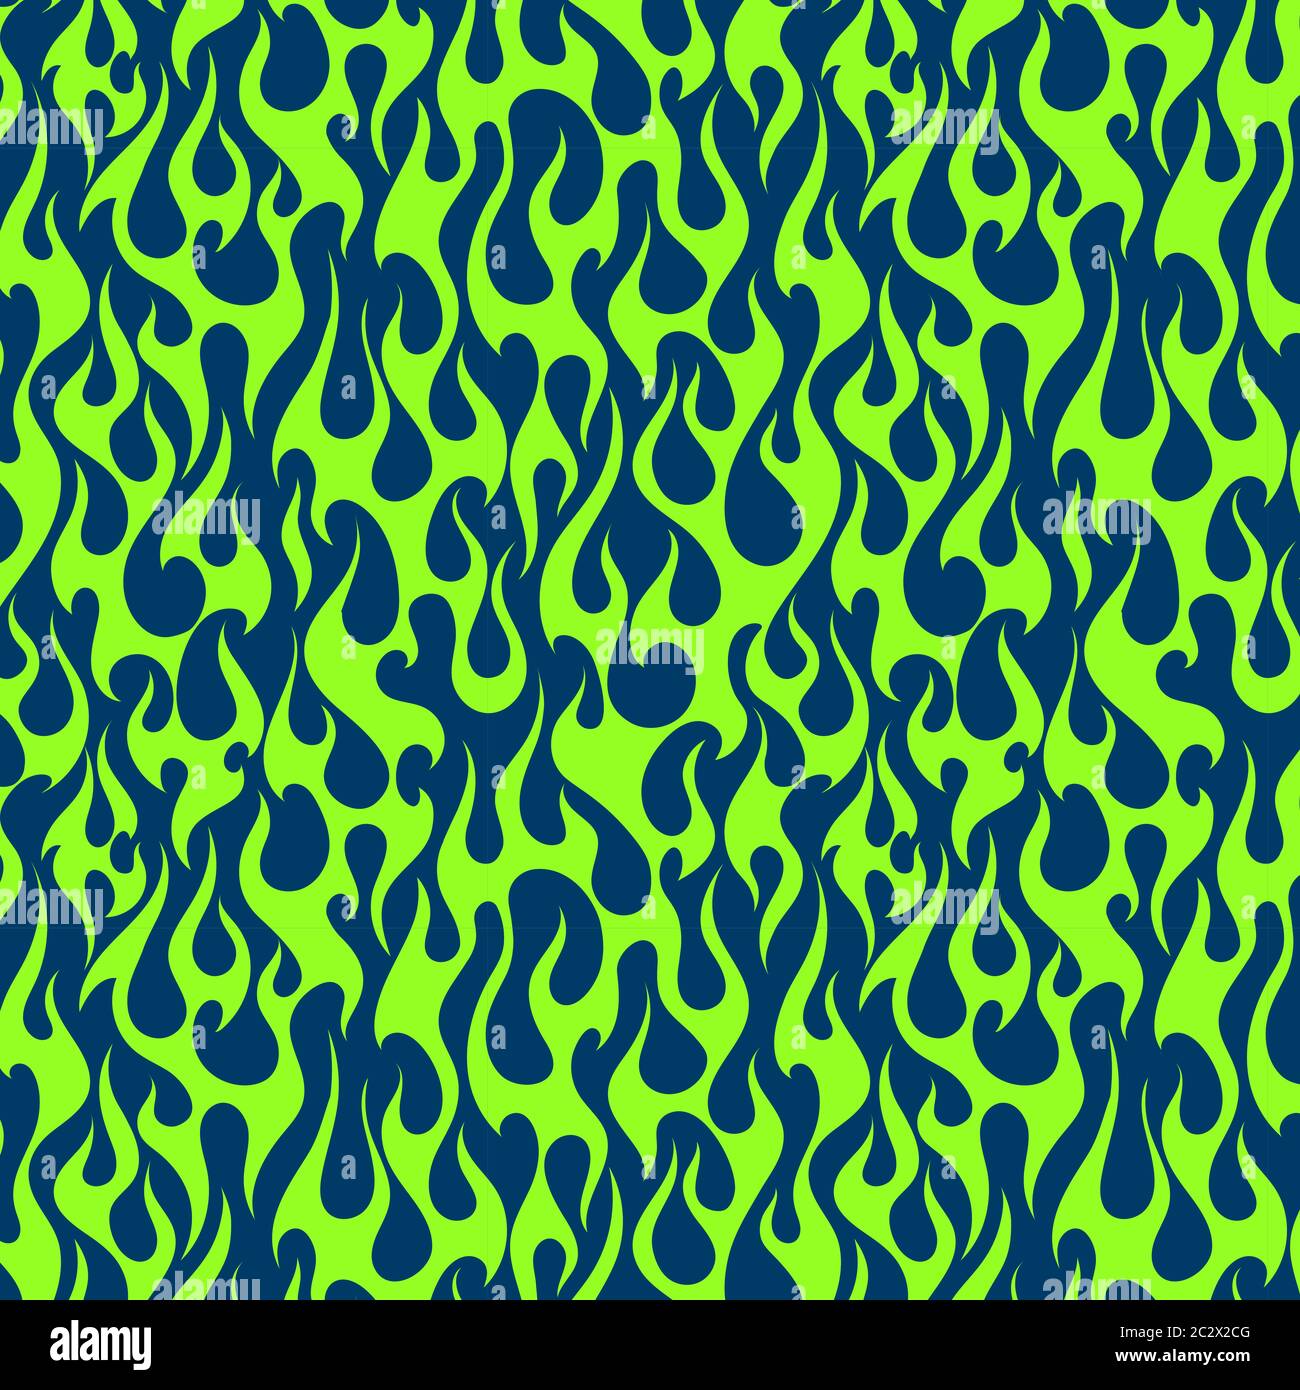 green flames backgrounds